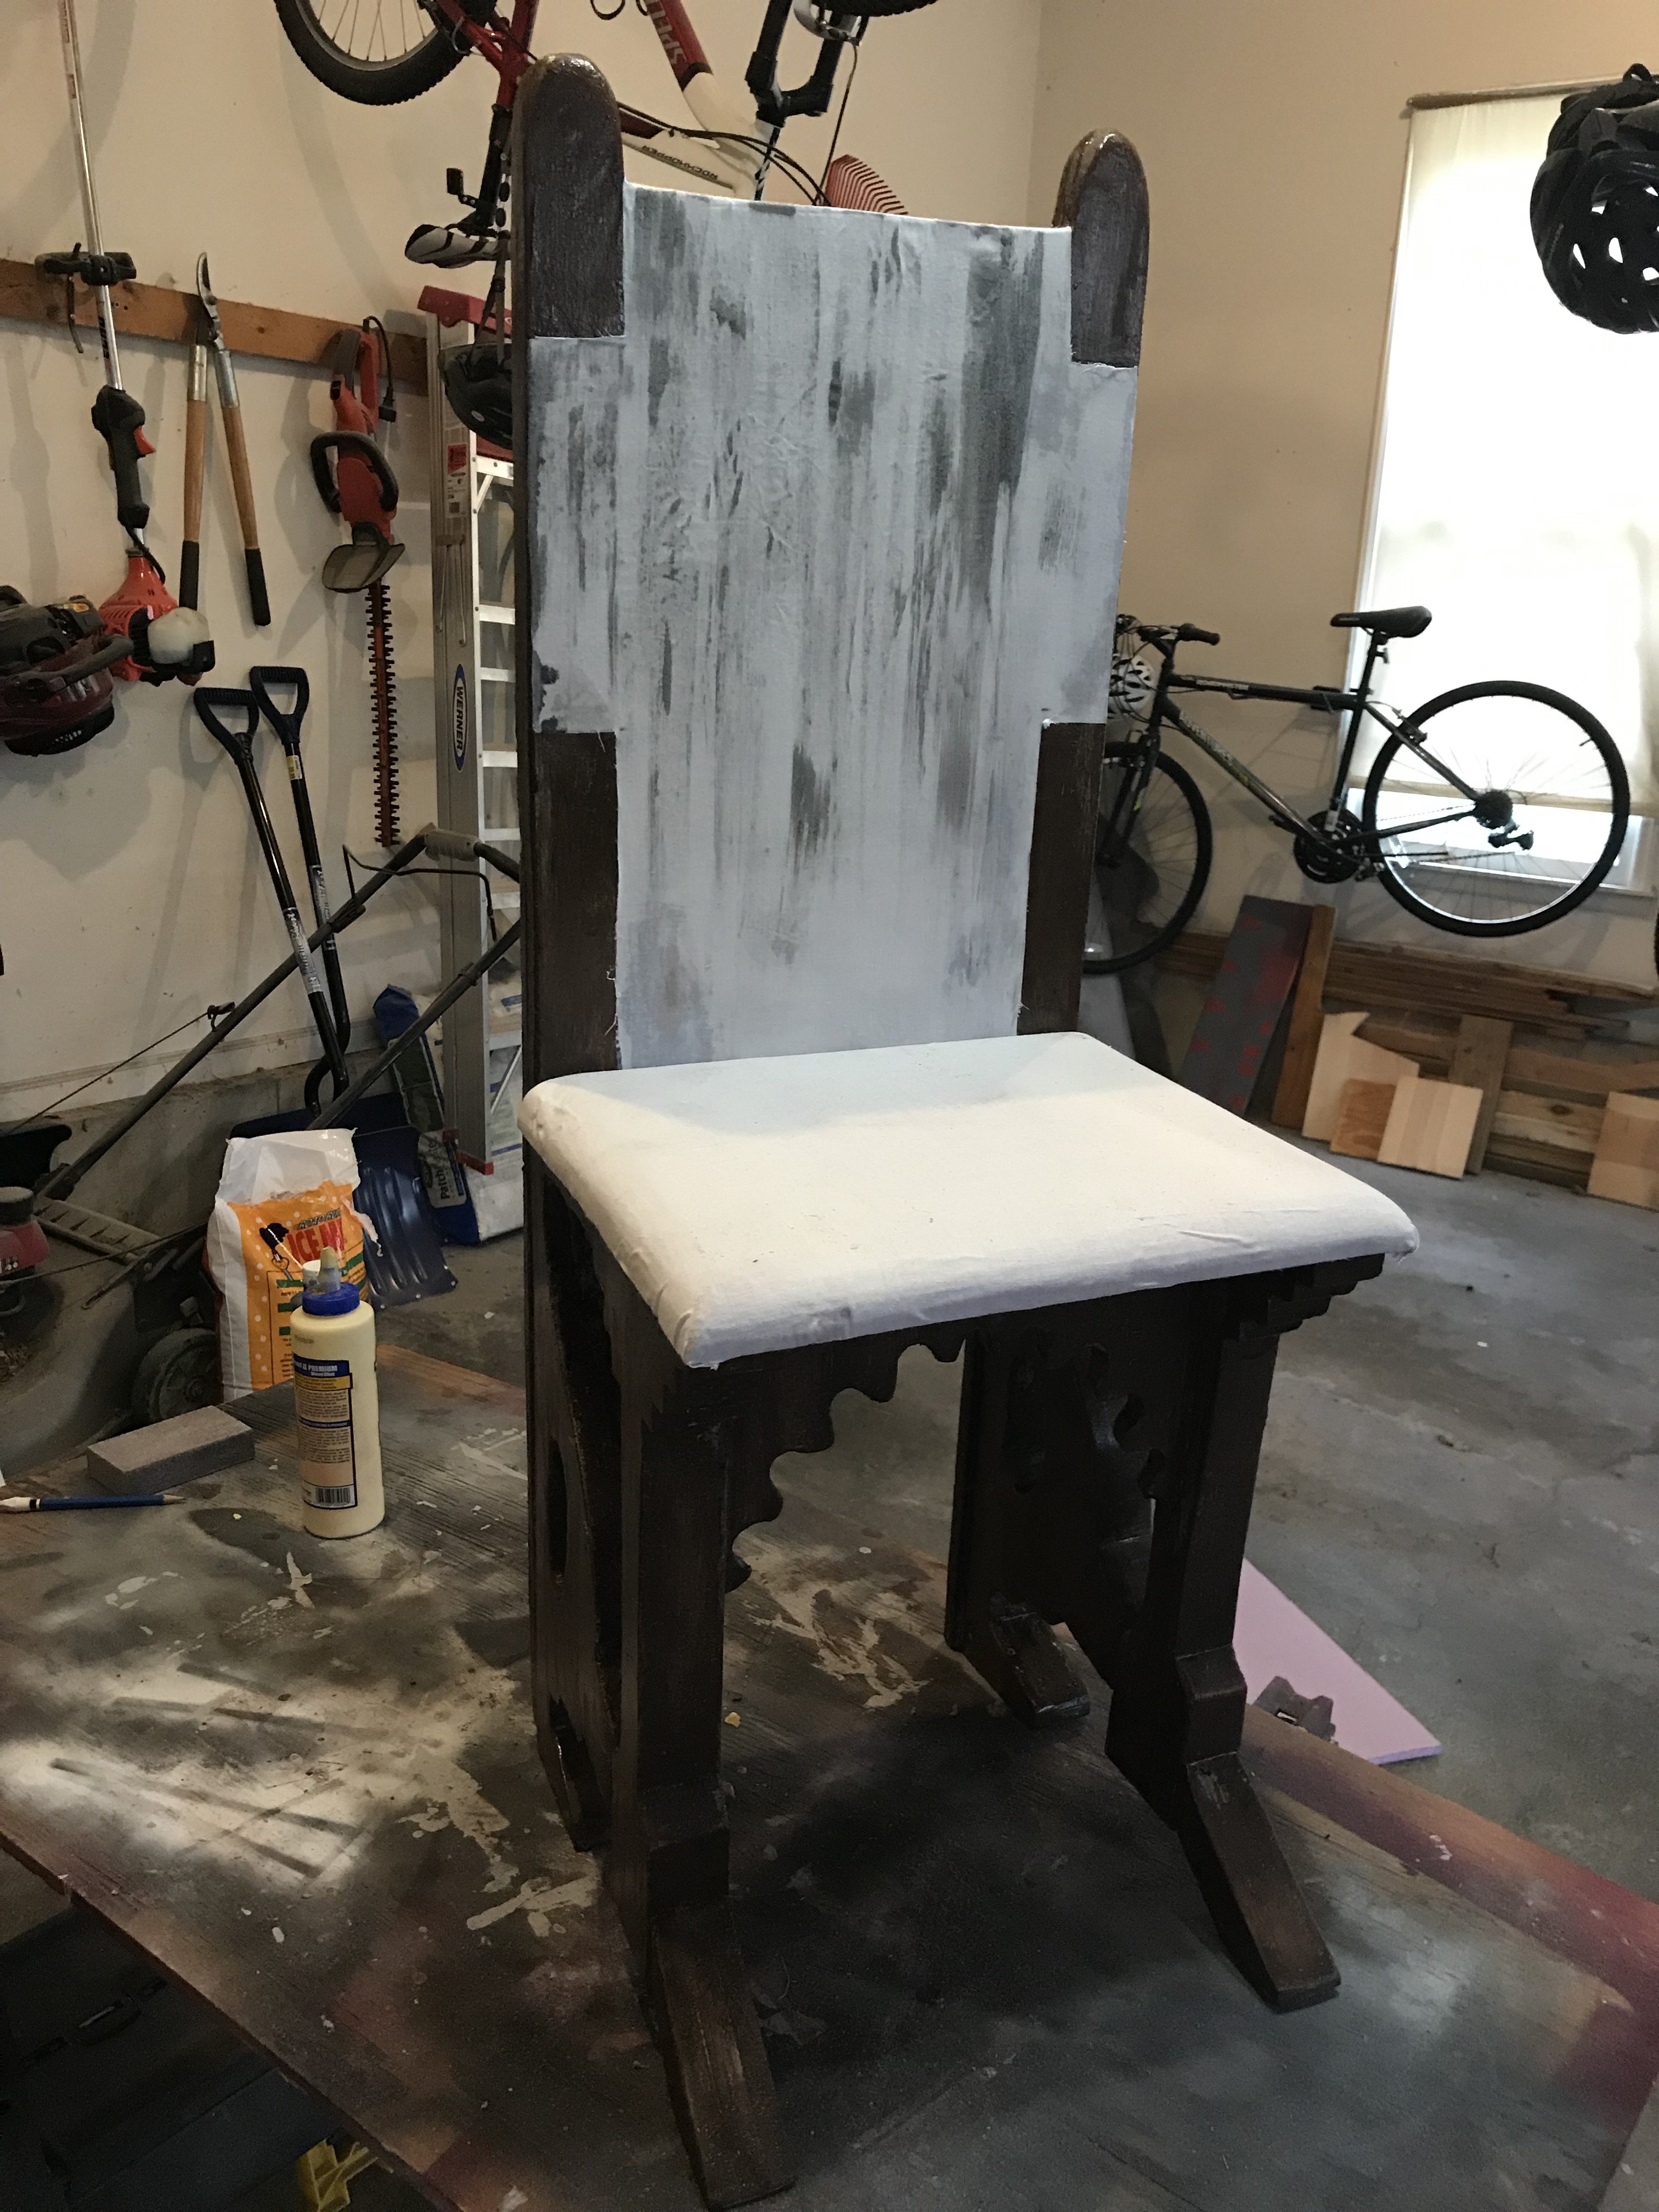 Chair upholstered and weathered